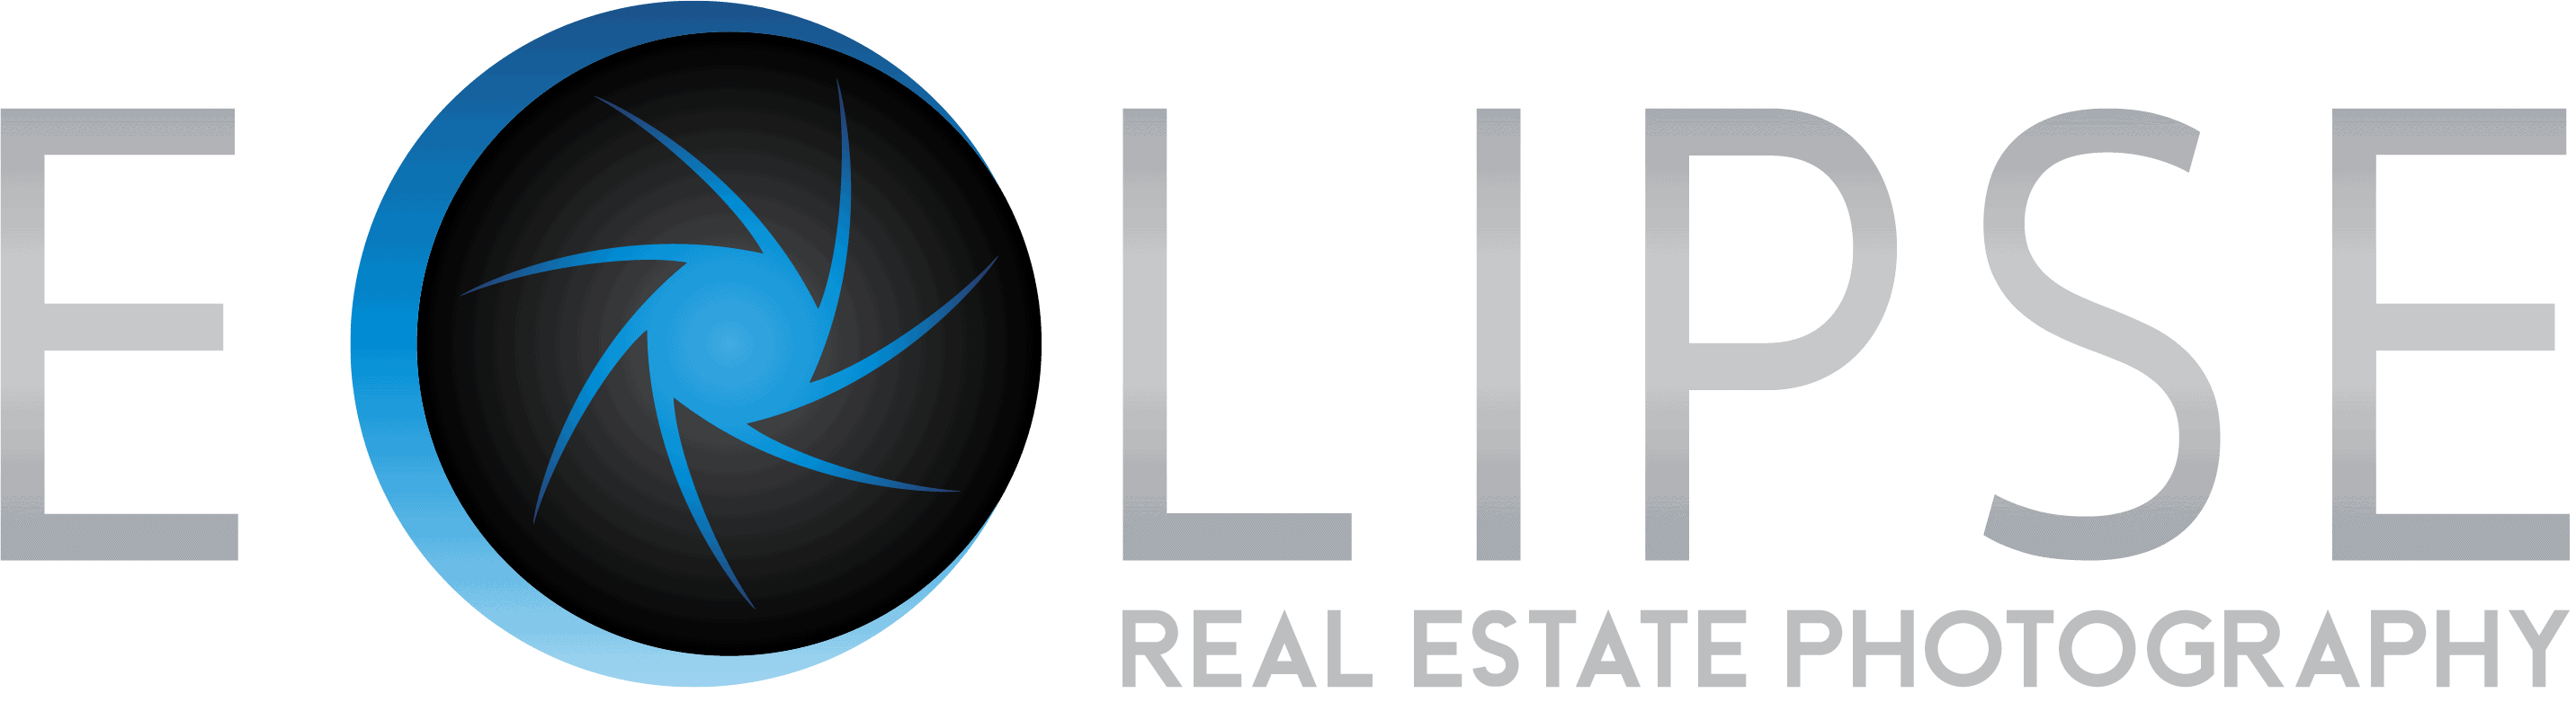 Eclipse Real Estate Photography Logo